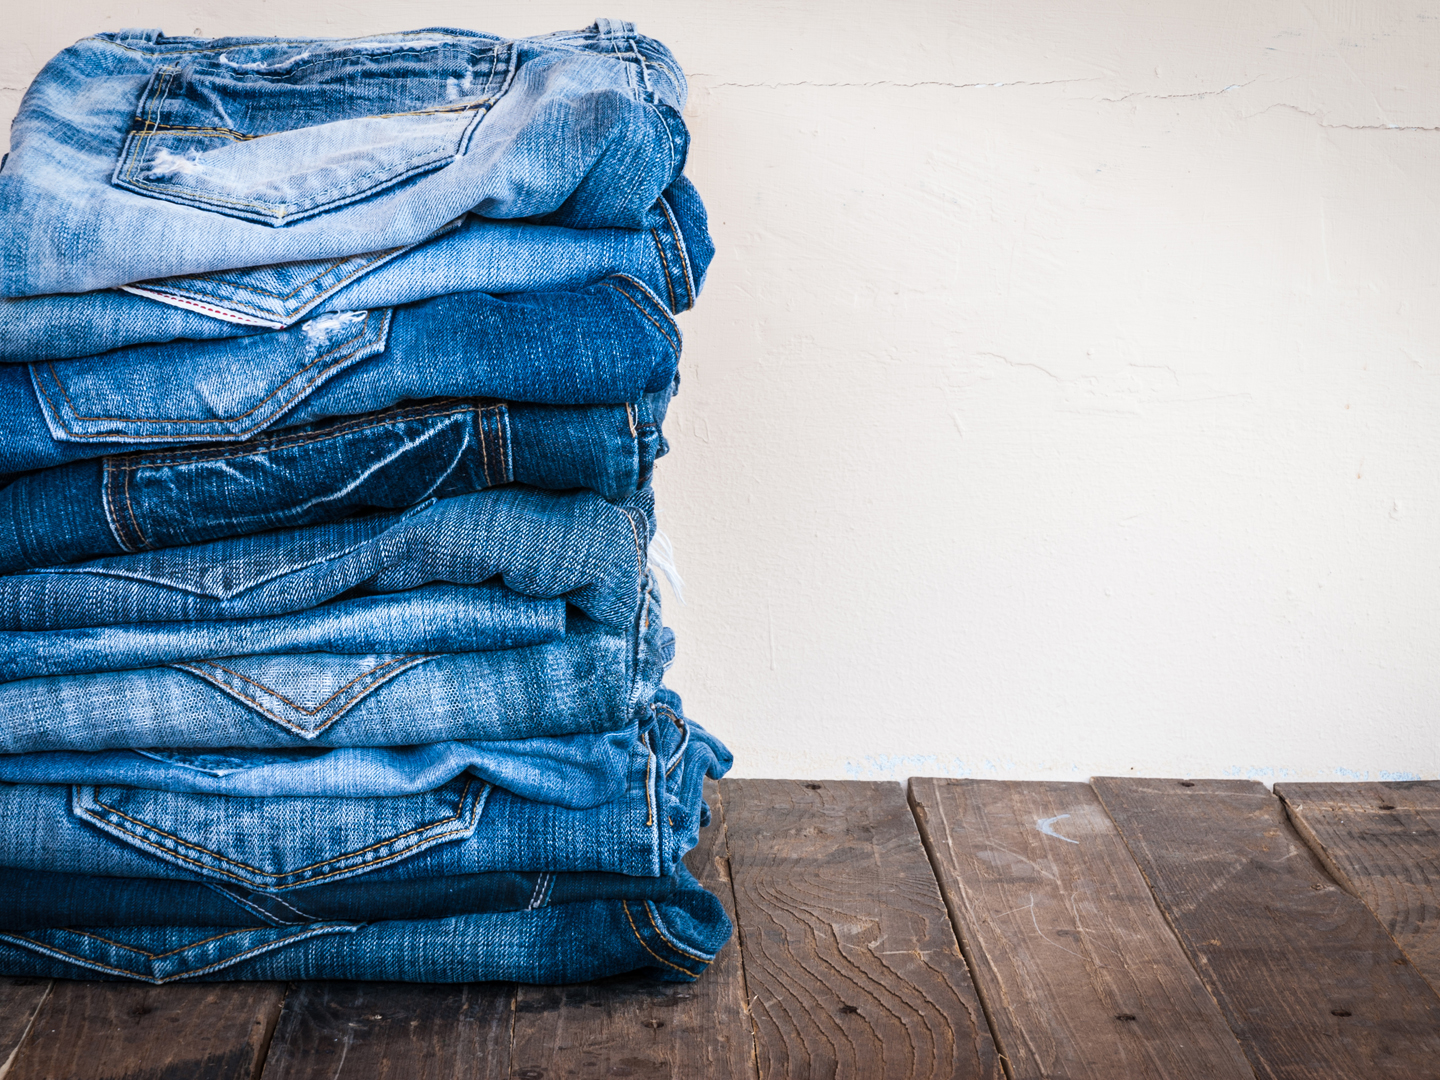 stack of various shades of blue jeans on old wood